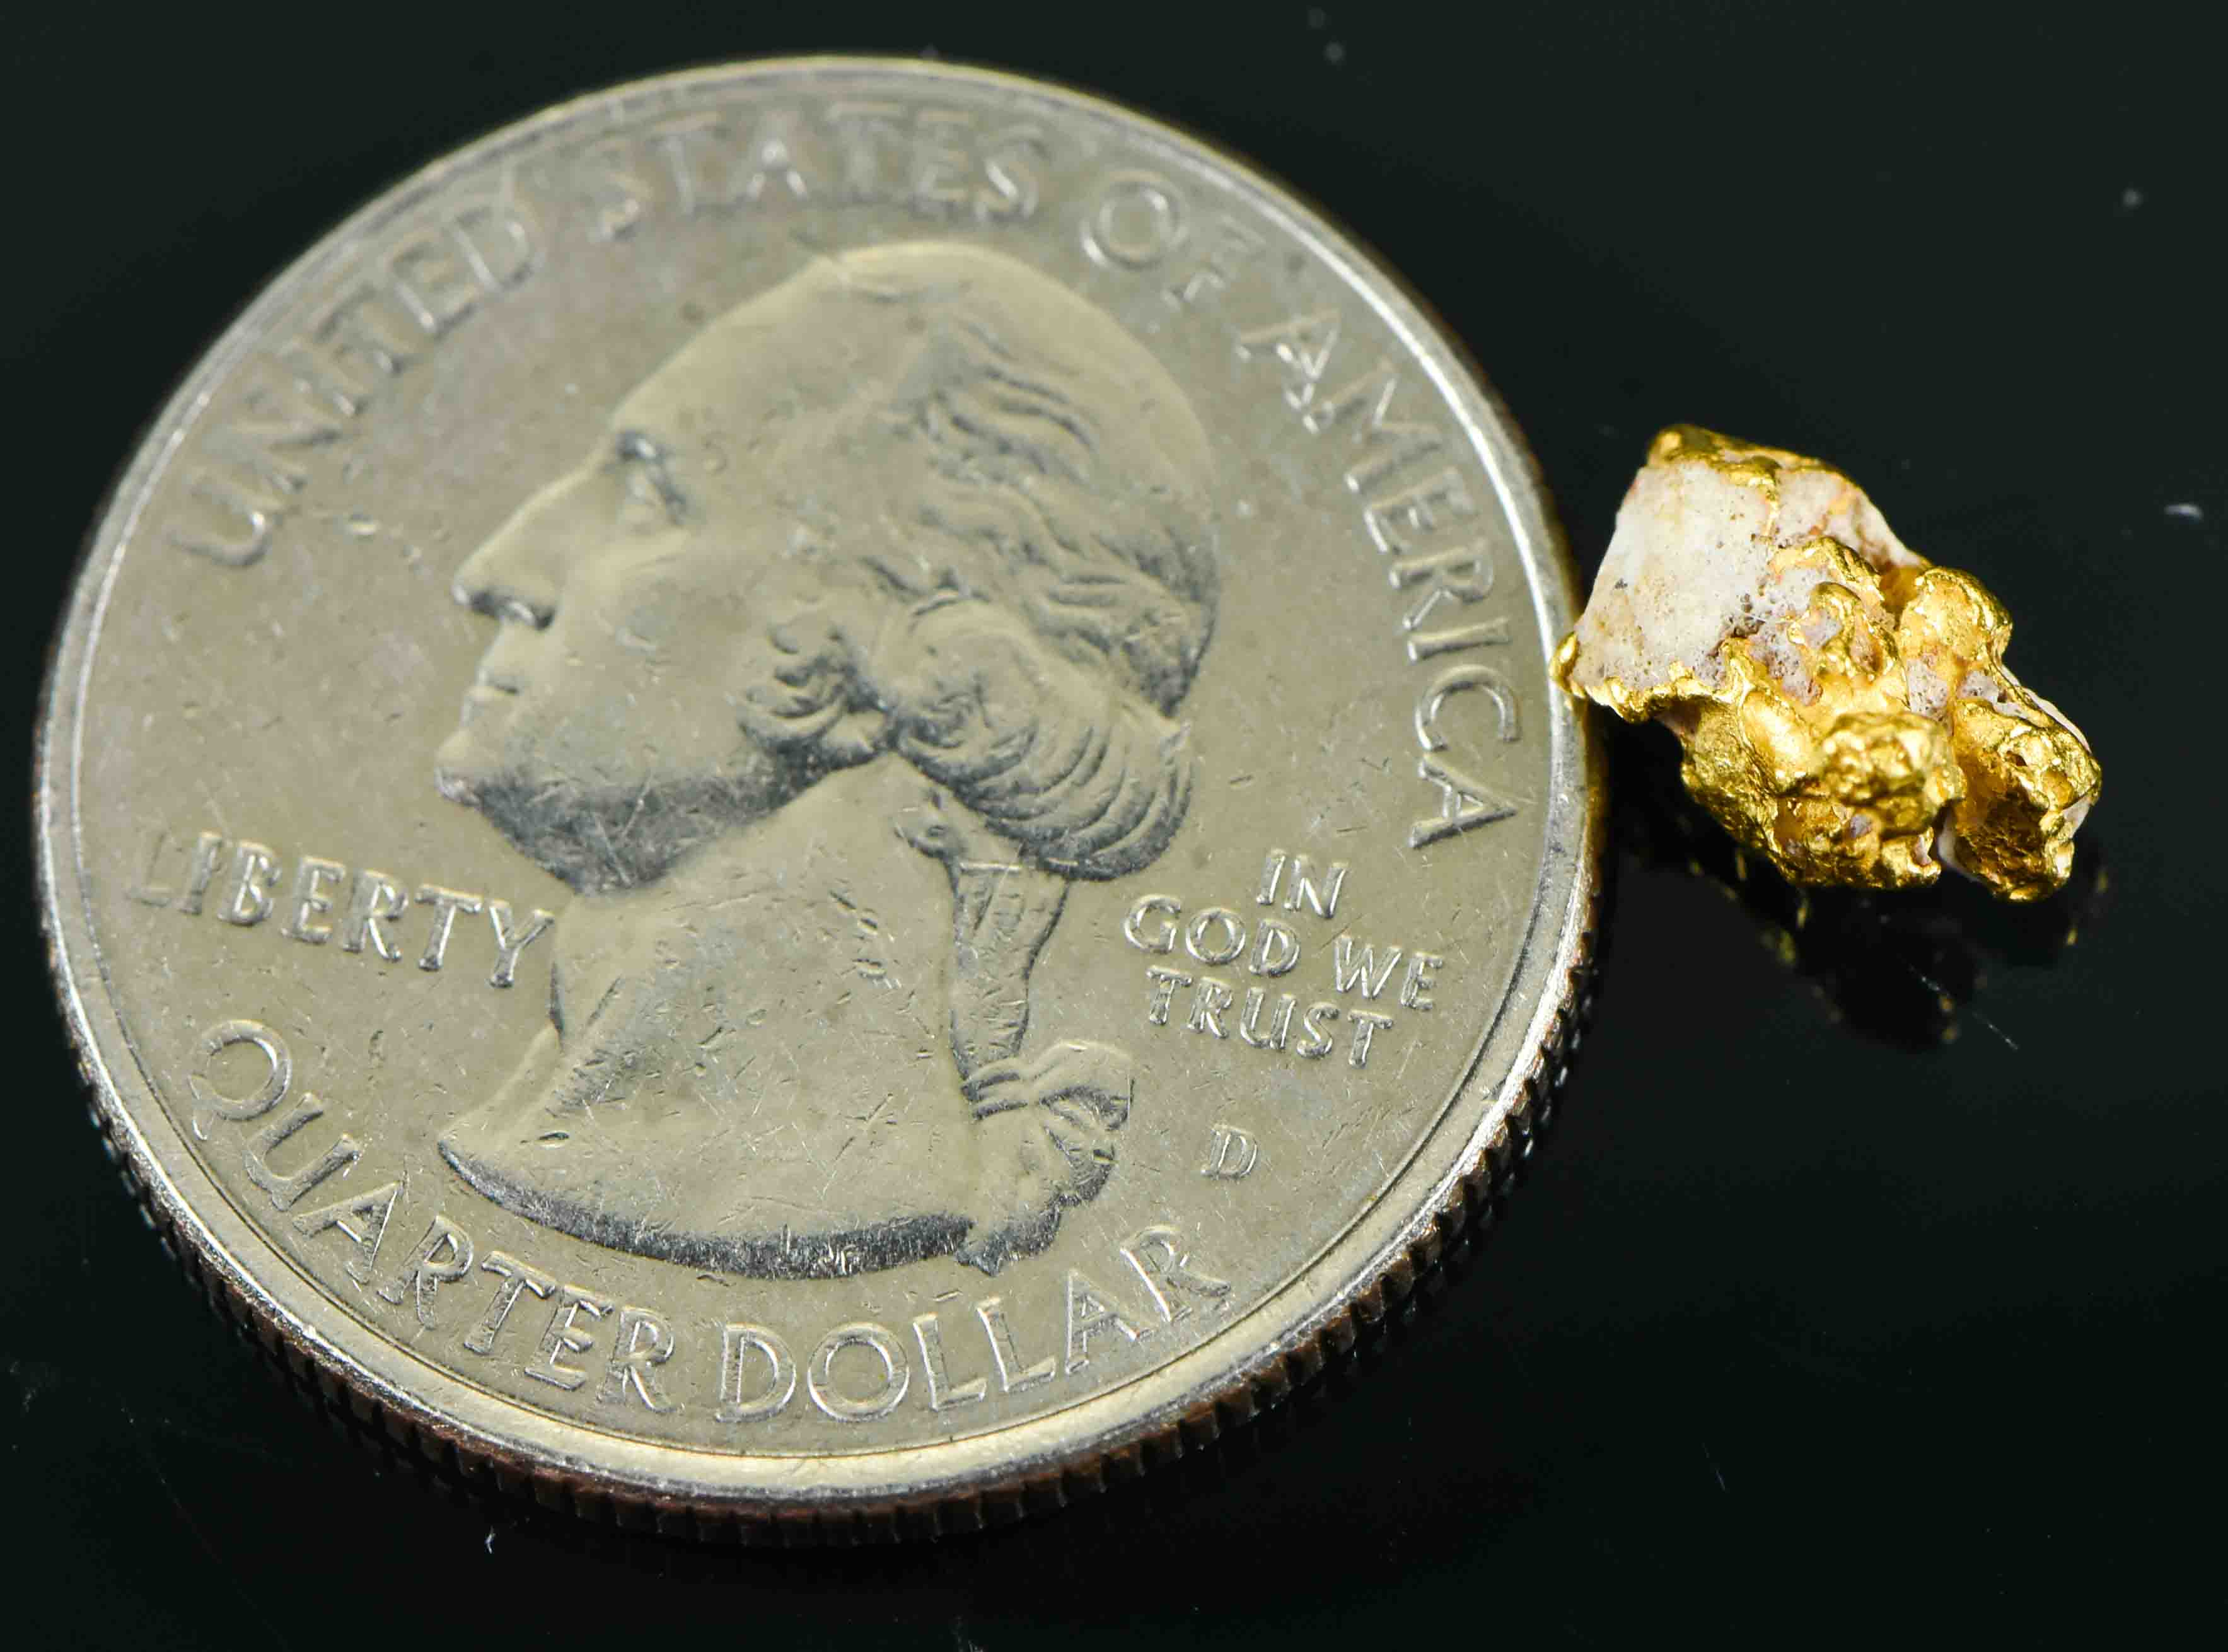 #33 Australian Natural Gold Nugget With Quartz Weighs 1.23 Grams.